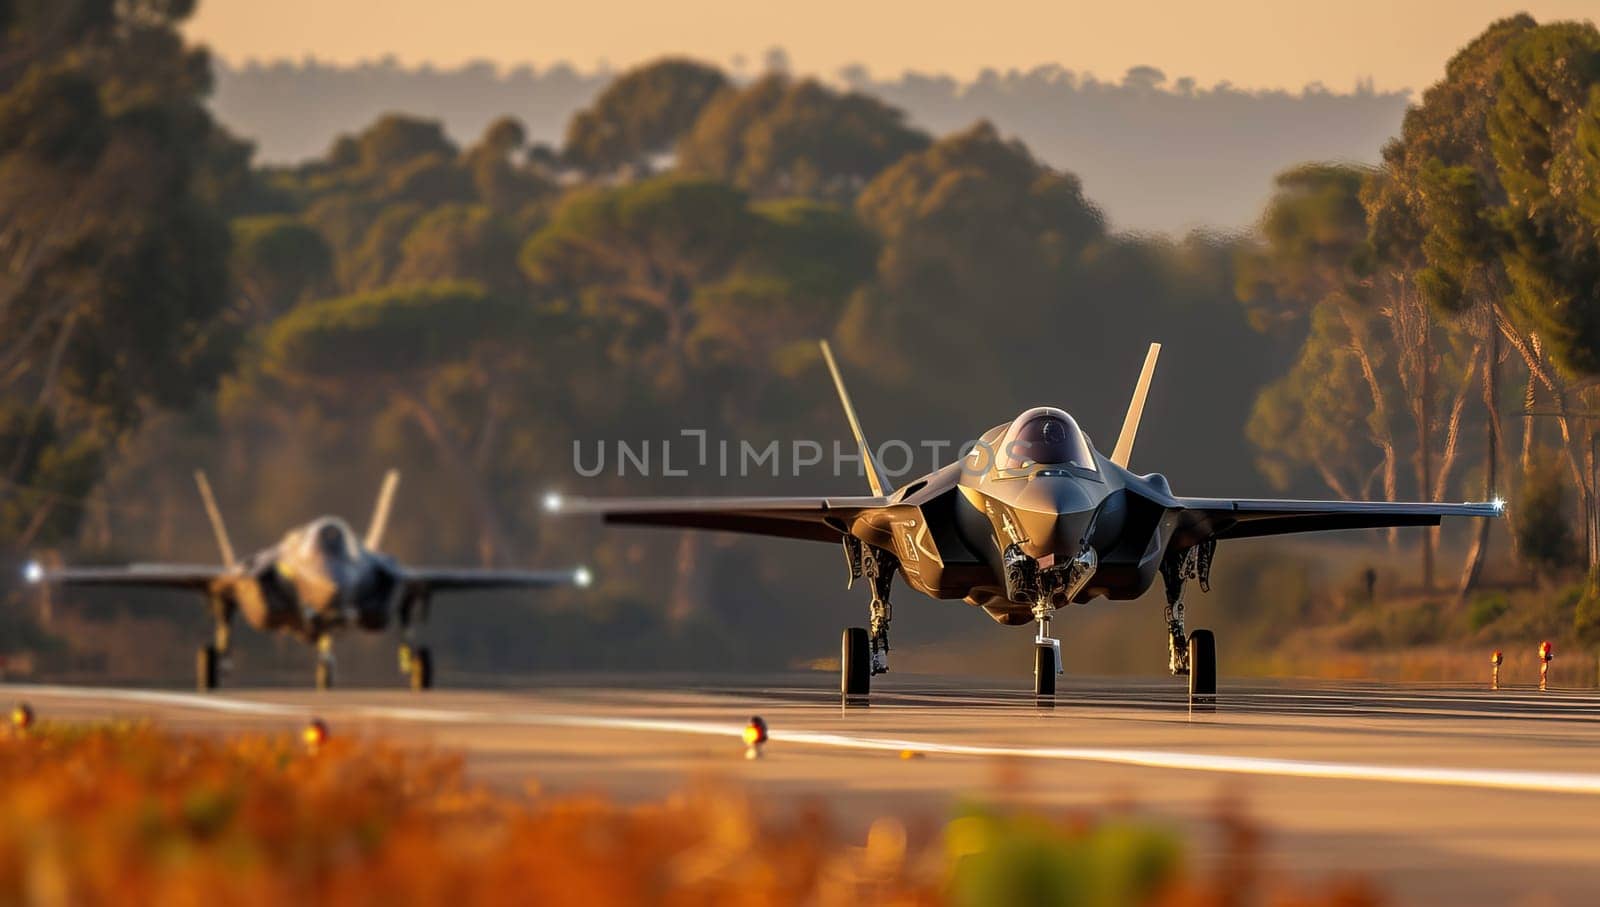 Fighter jets ready for takeoff at sunrise by ailike